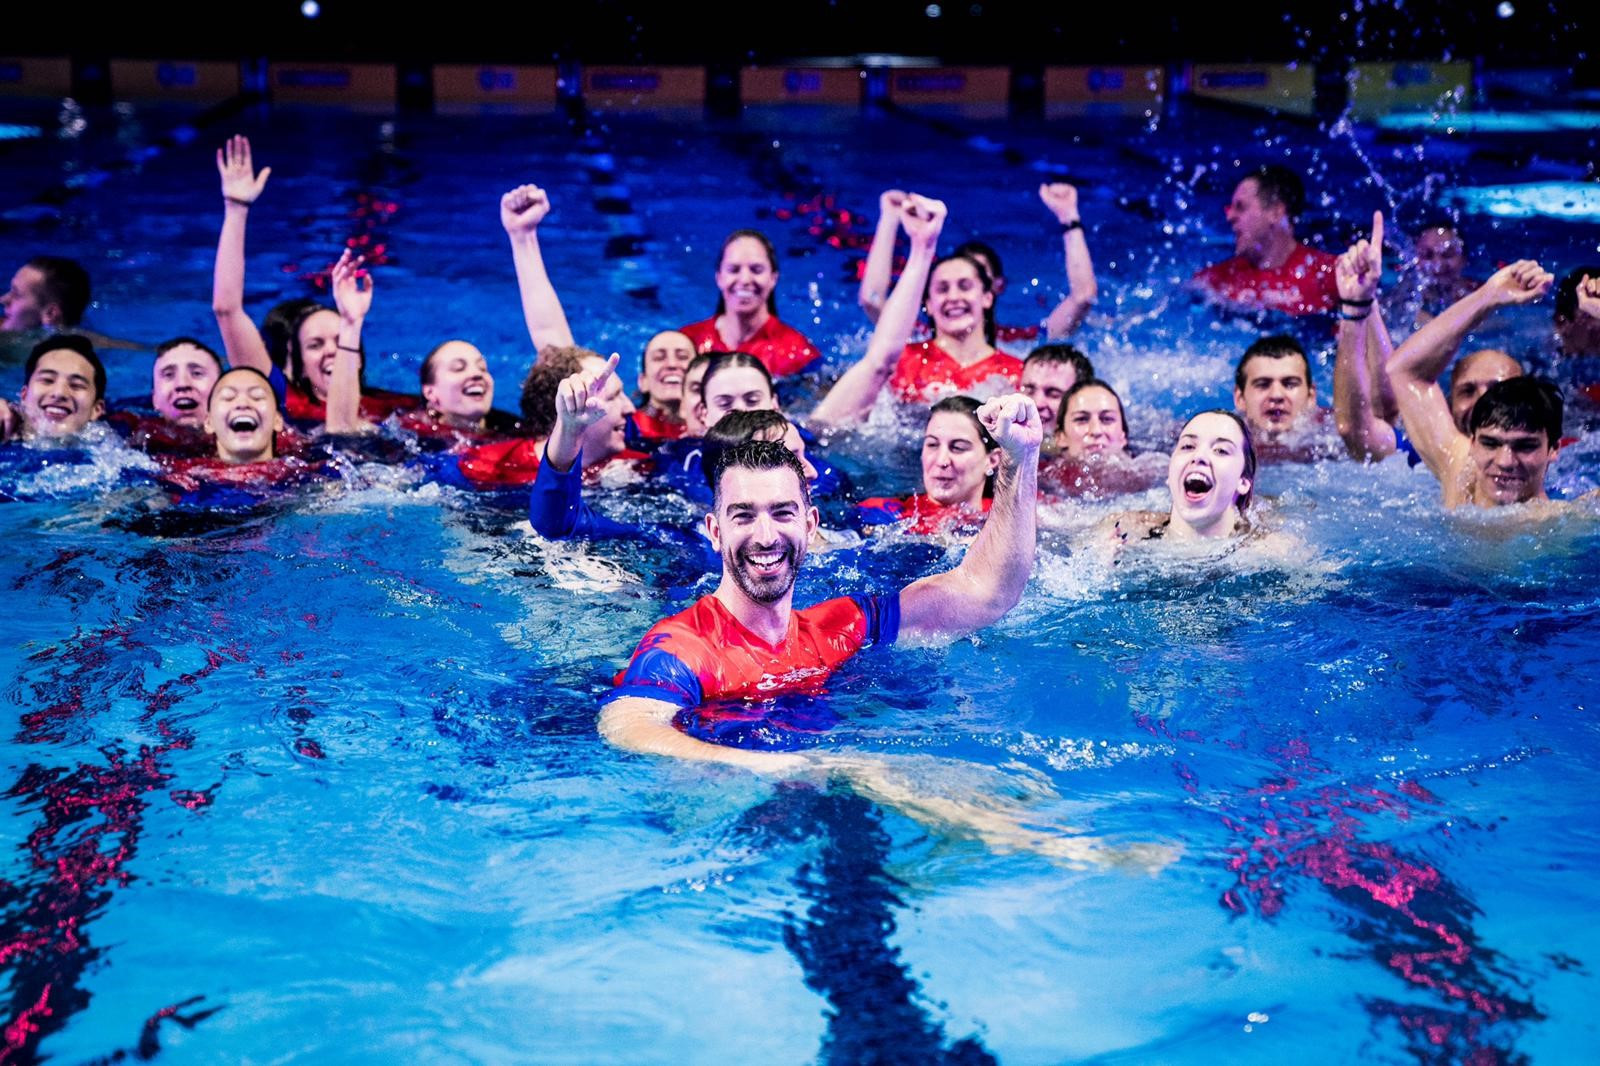 Energy Standard were crowned as the inaugural winners of the International Swimming League ©ISL